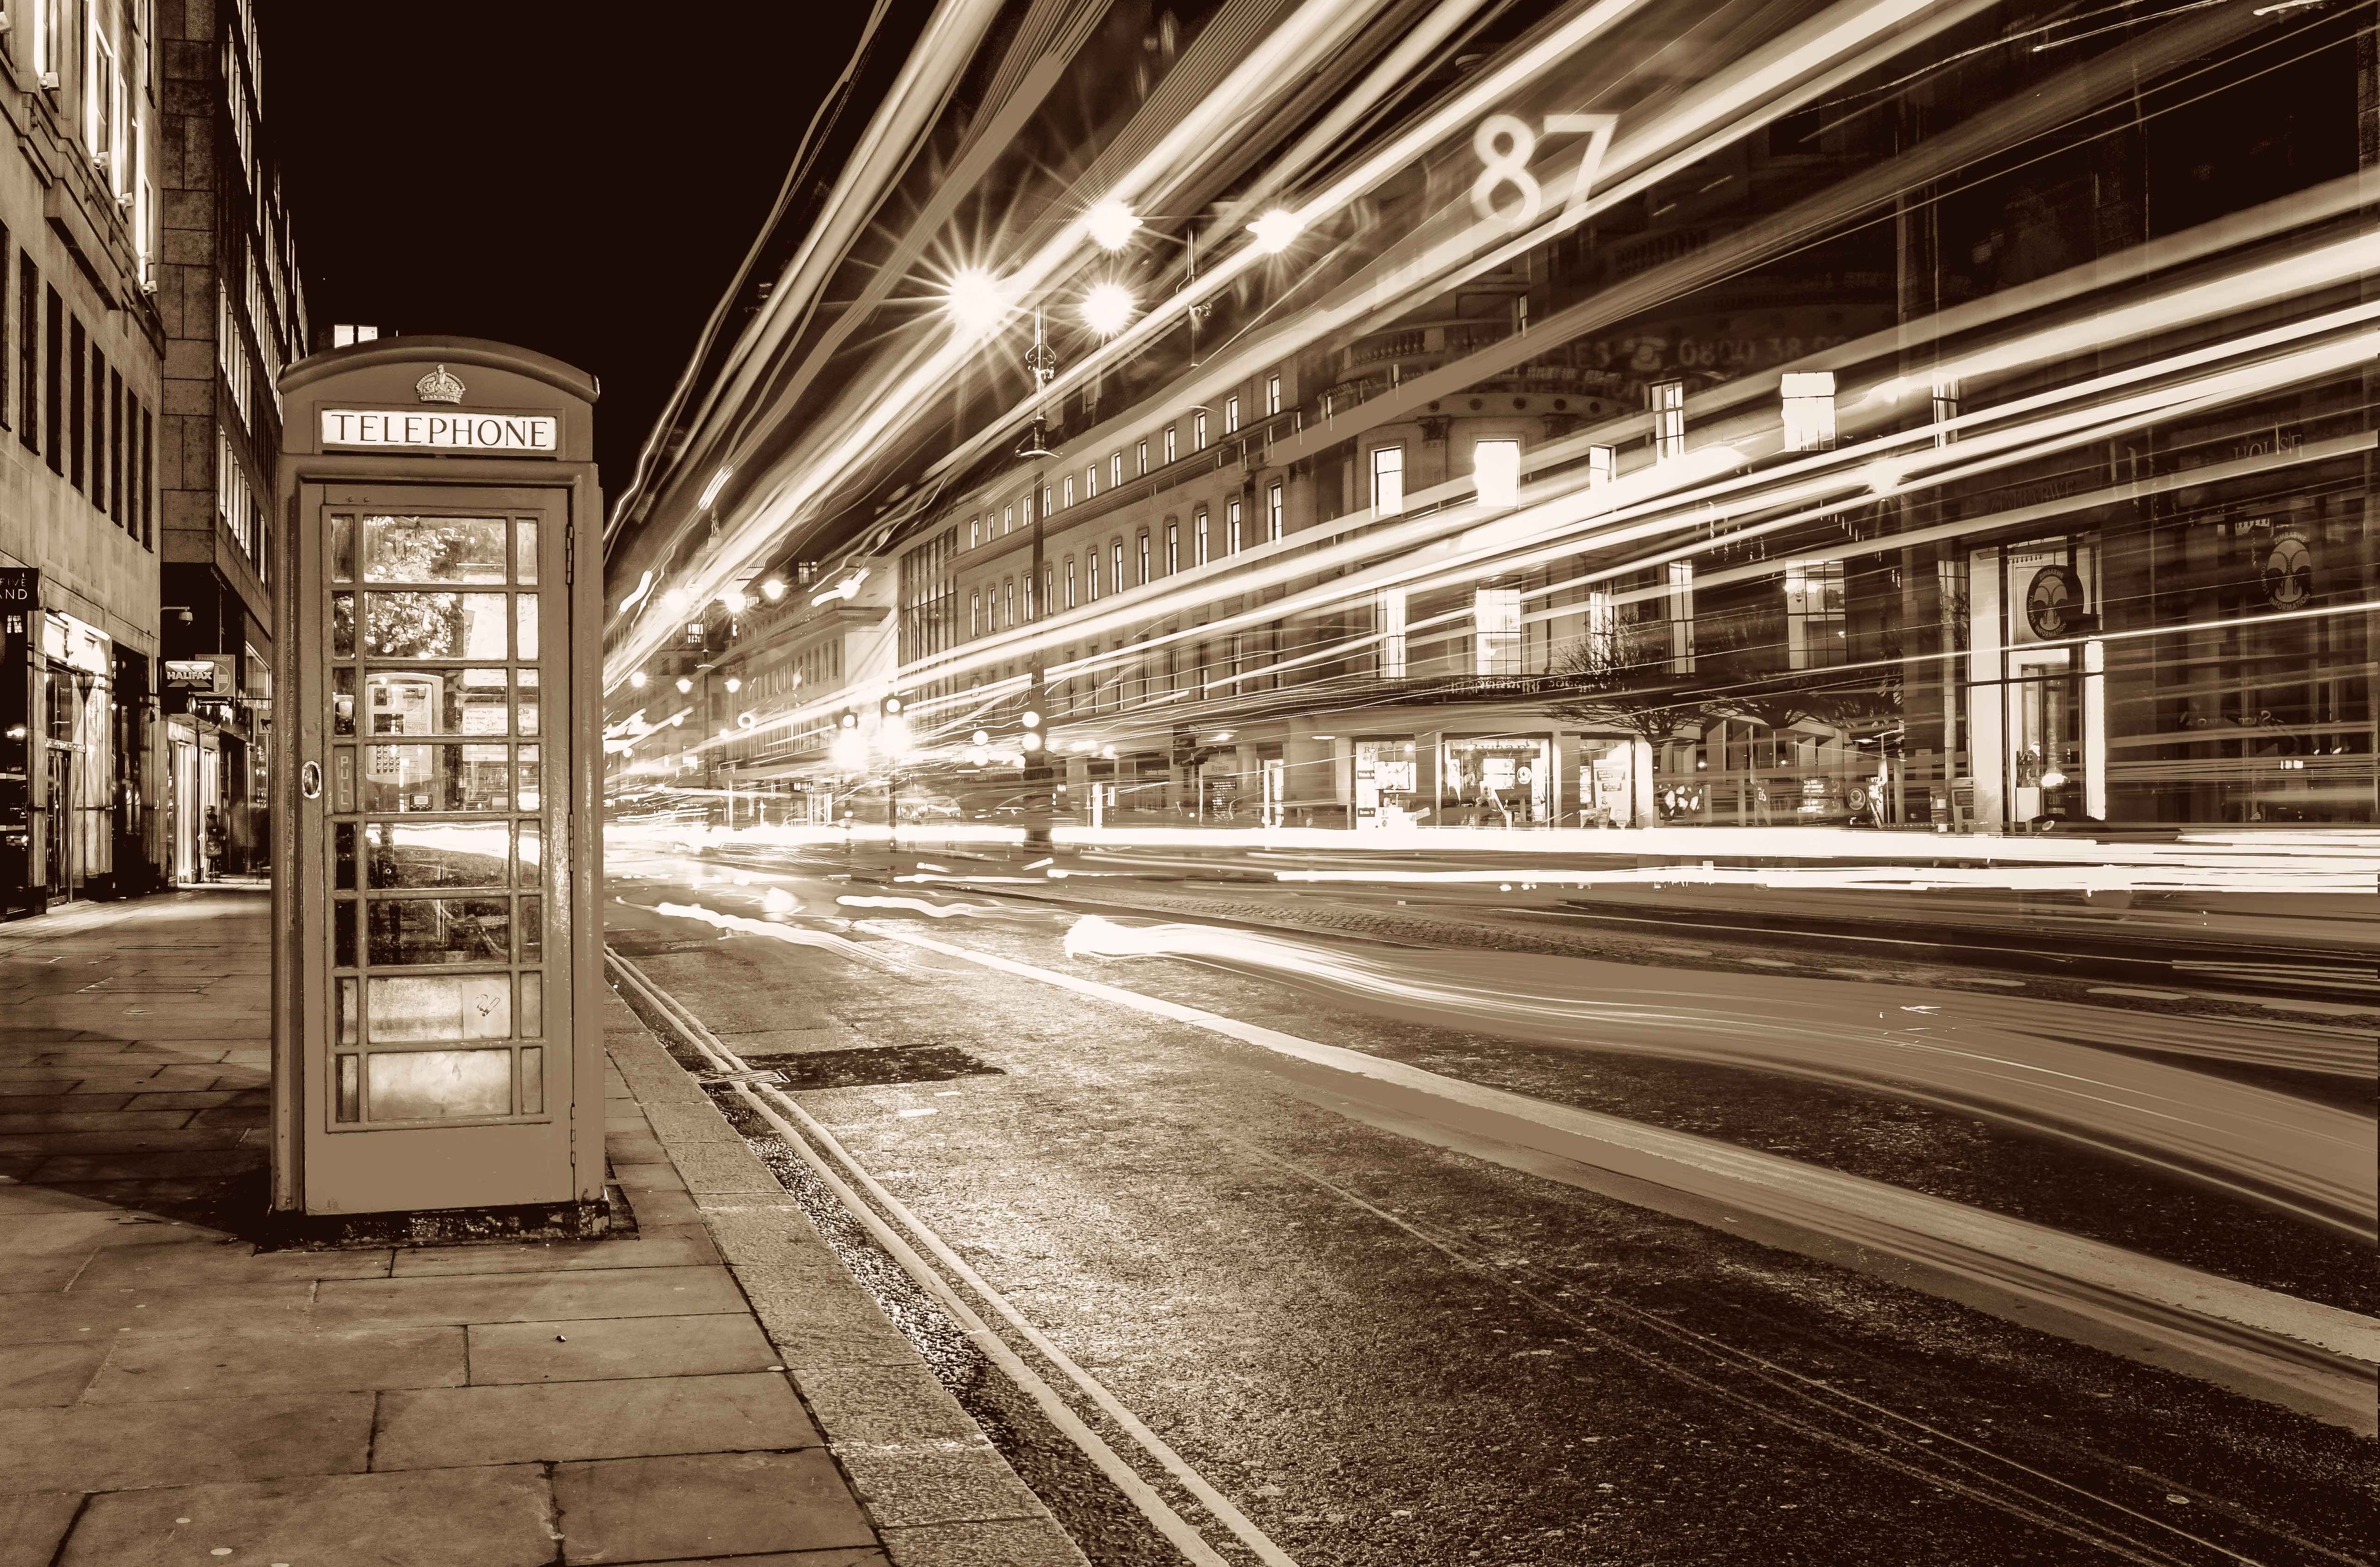 London street with phone box and bright lights